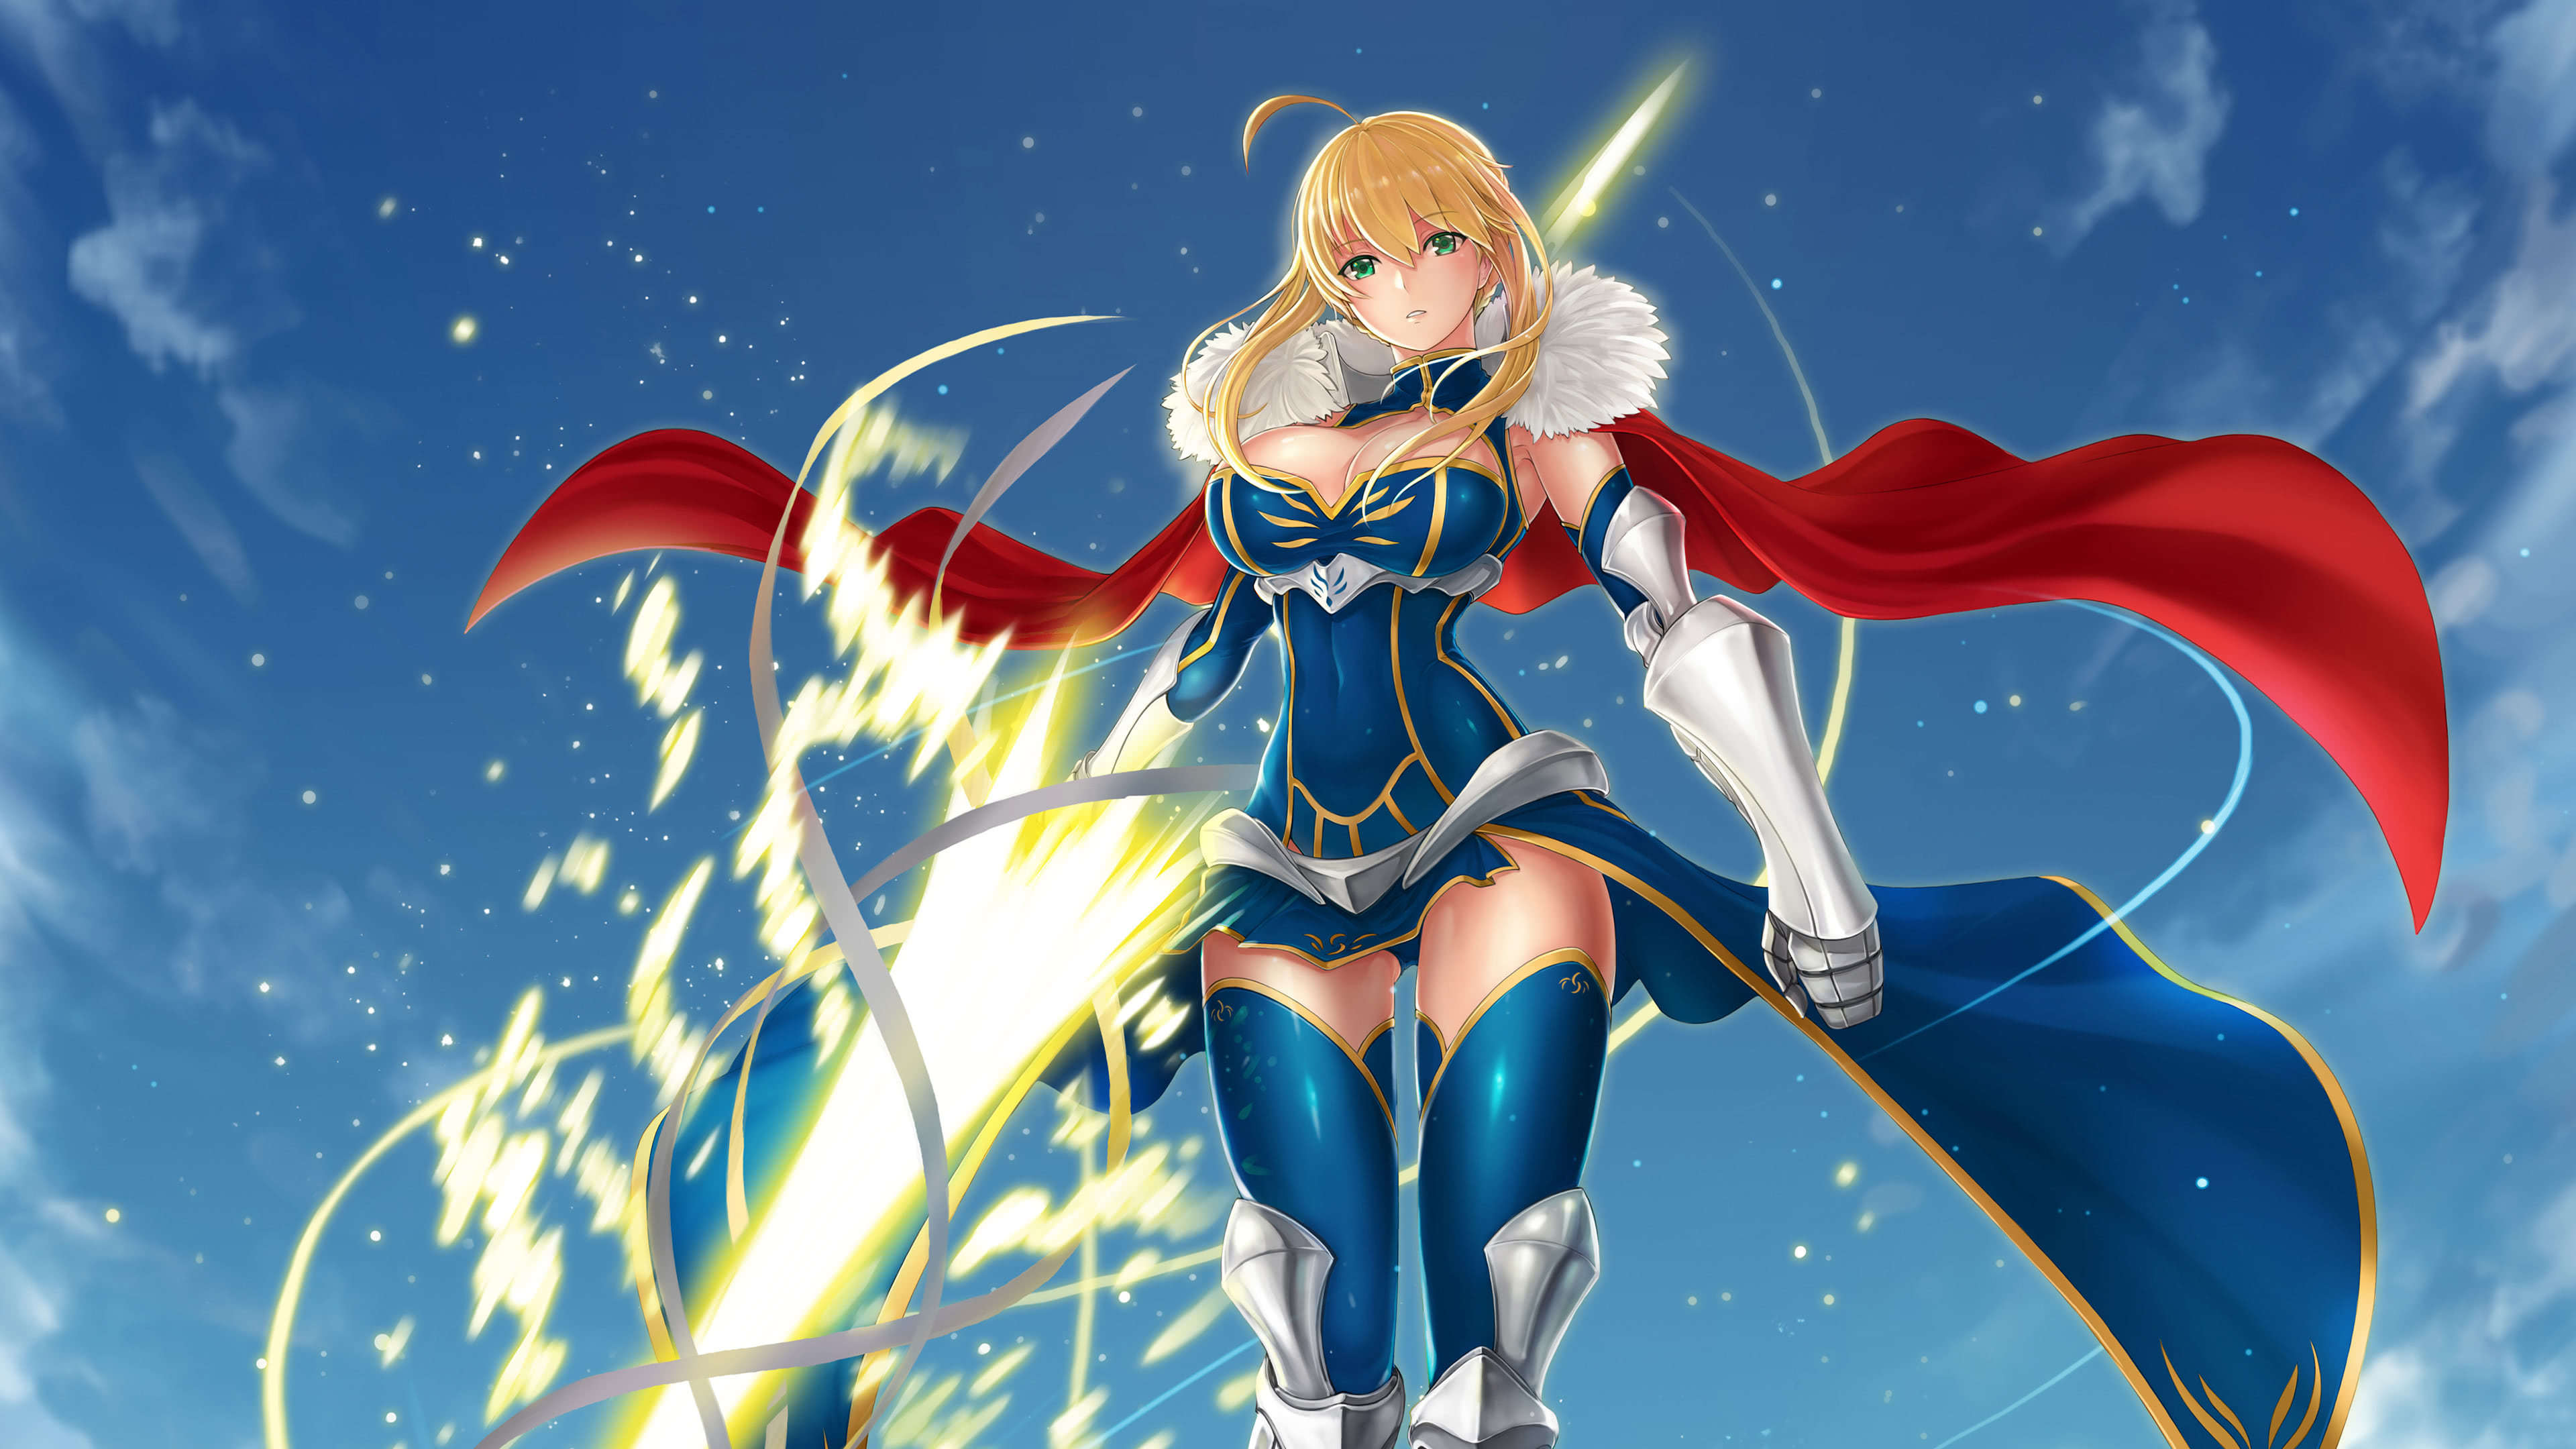 FateGrand Order Wallpaper by AB77 on DeviantArt